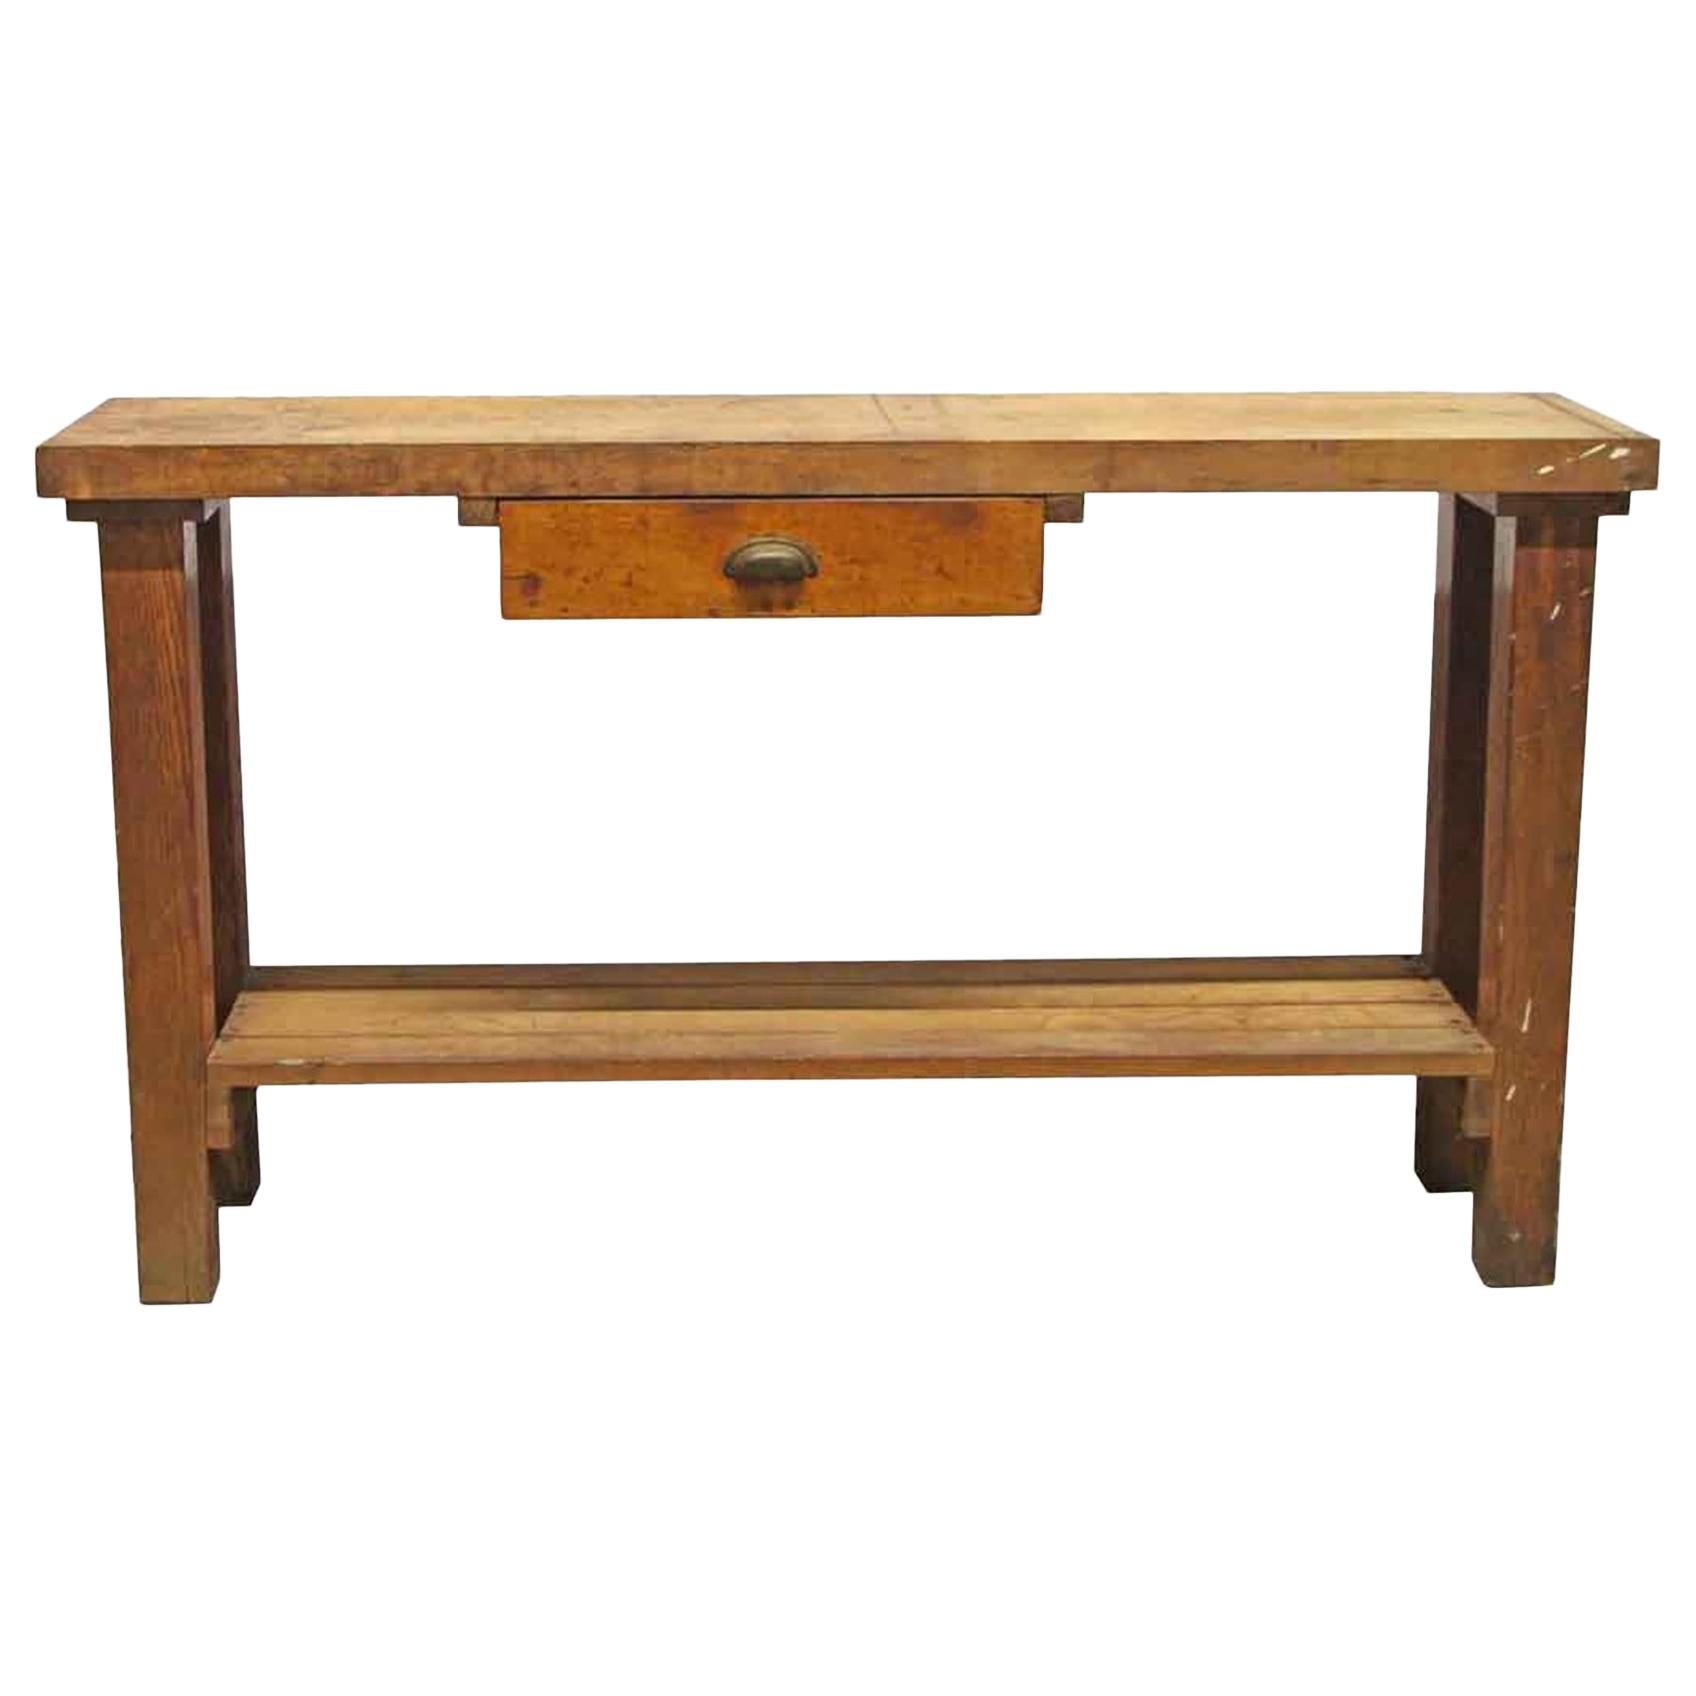 1950s Original Distressed Wood Work Bench with Drawer and Lower Shelf